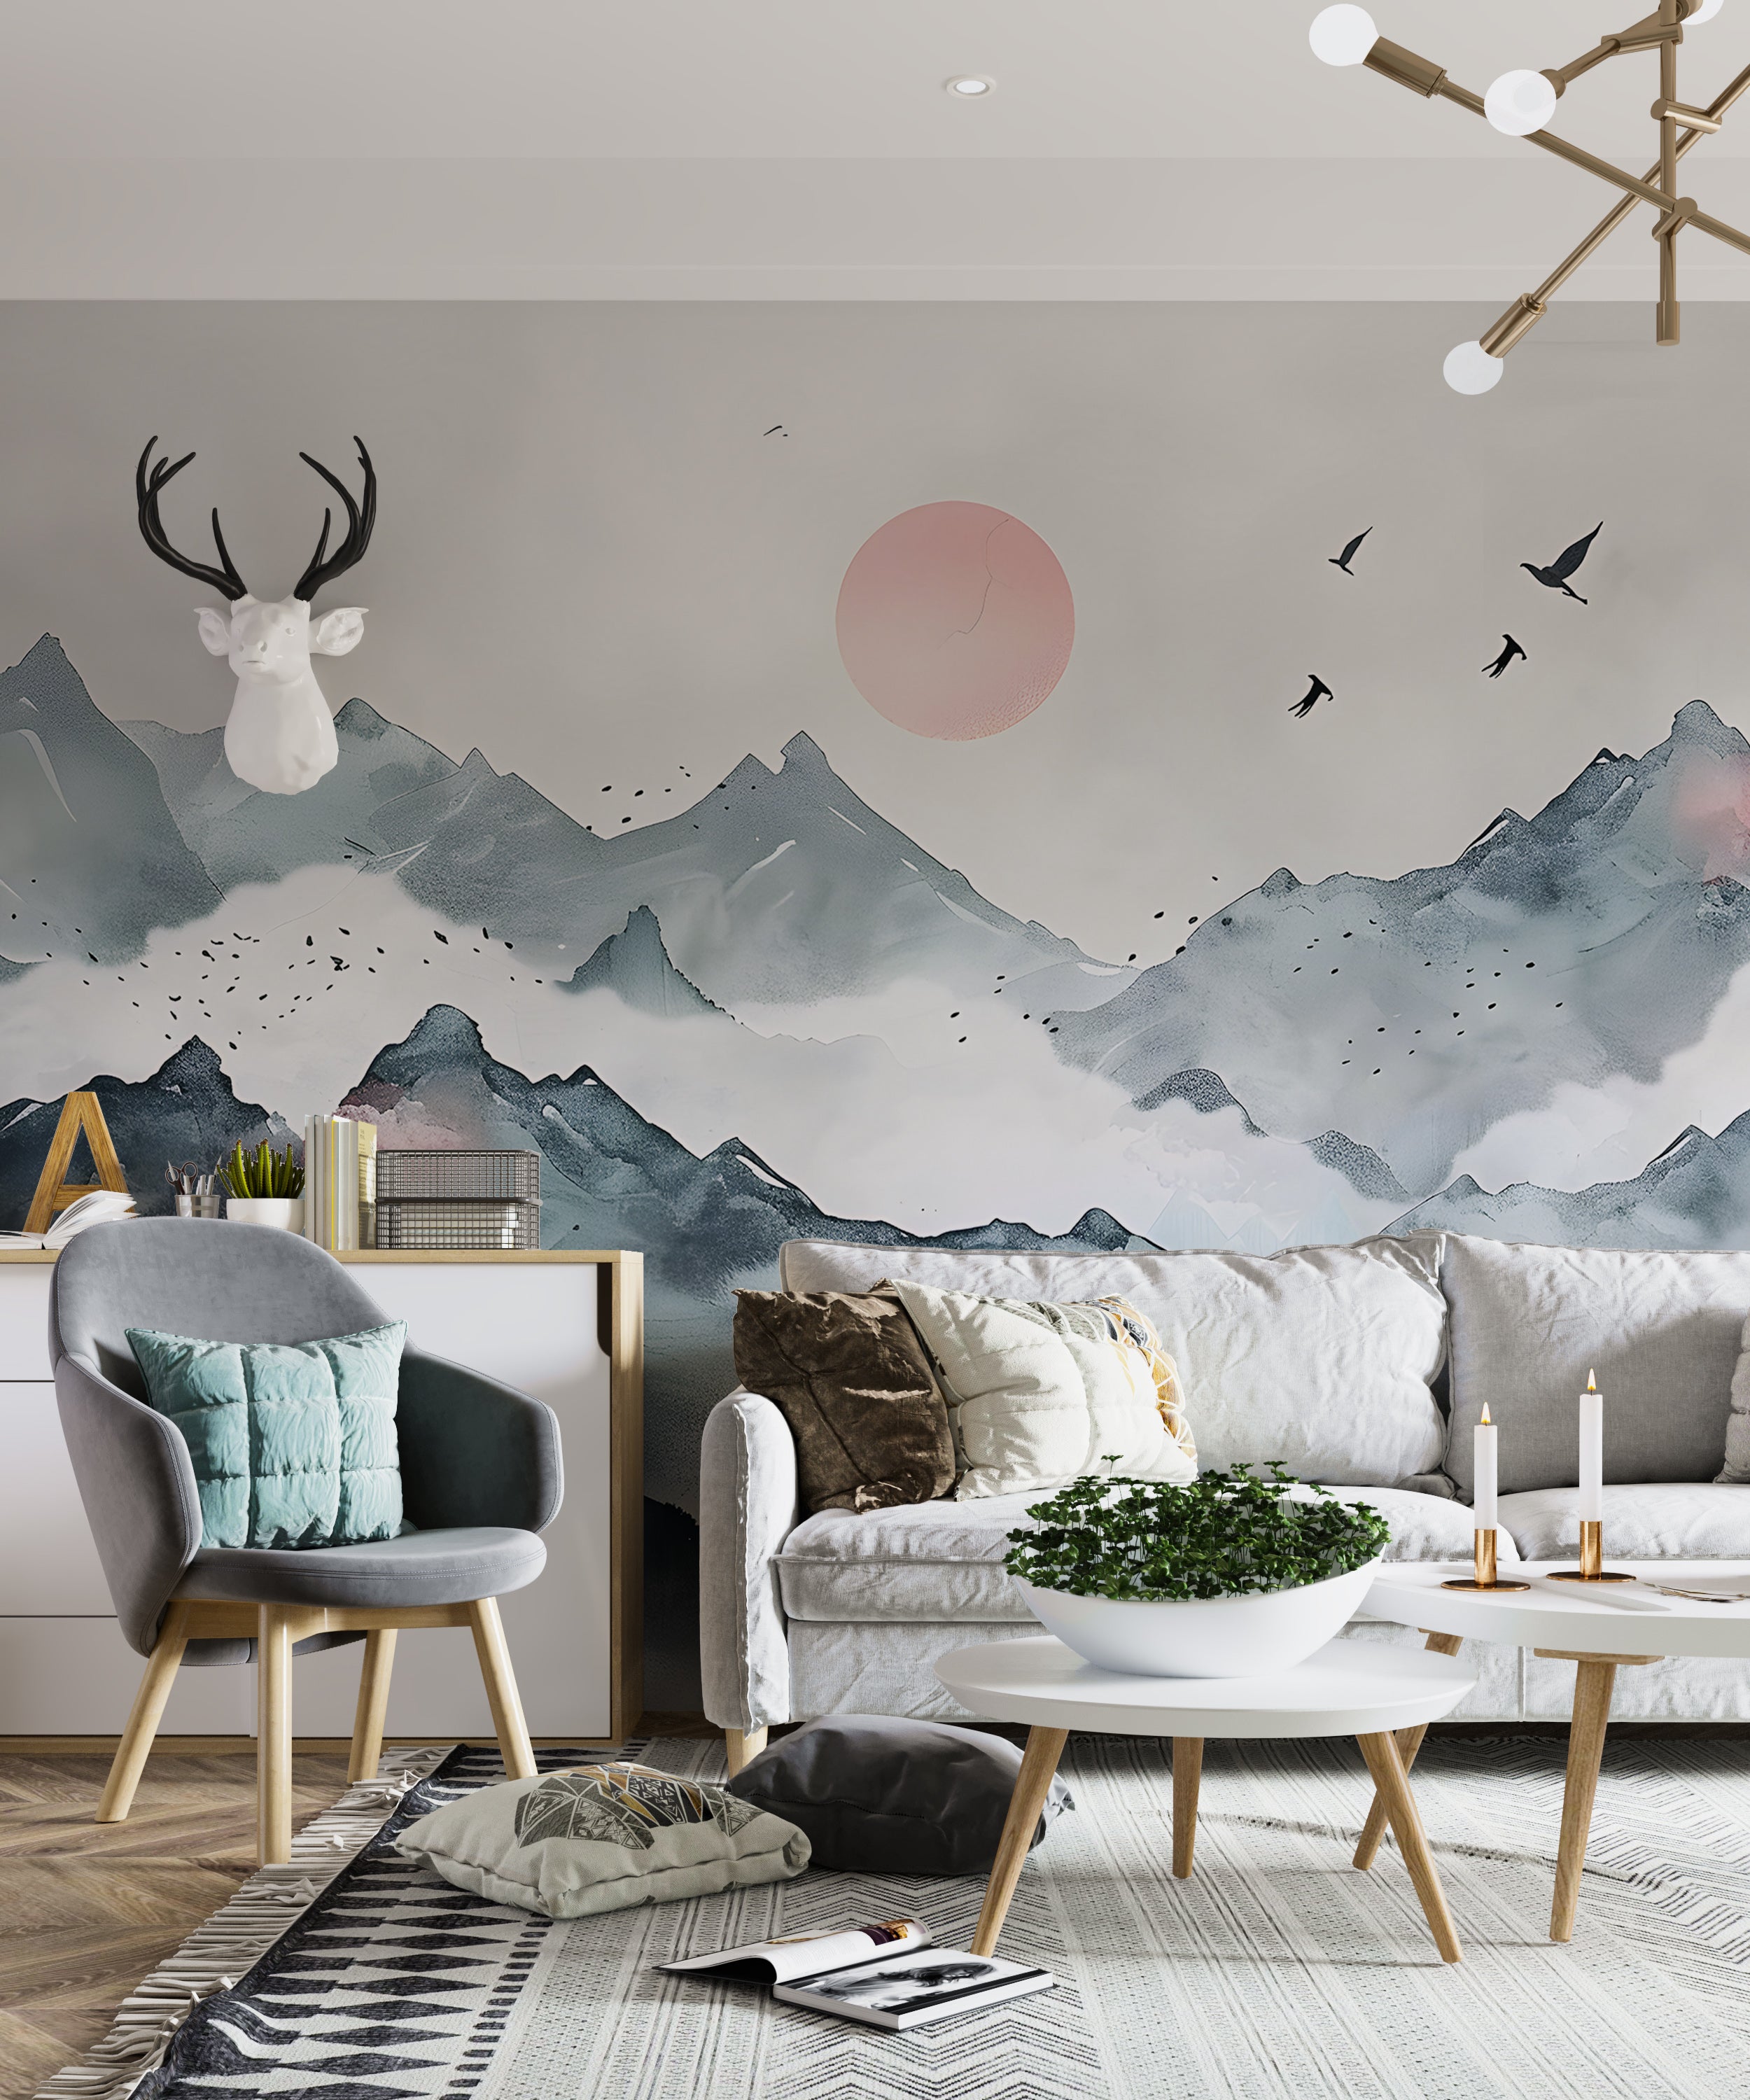 Abstract Mountains Sunset Mural, Watercolor Japanese Landscape Wallpaper, Peel and Stick Removable Green Foggy Mountain Wall Decal